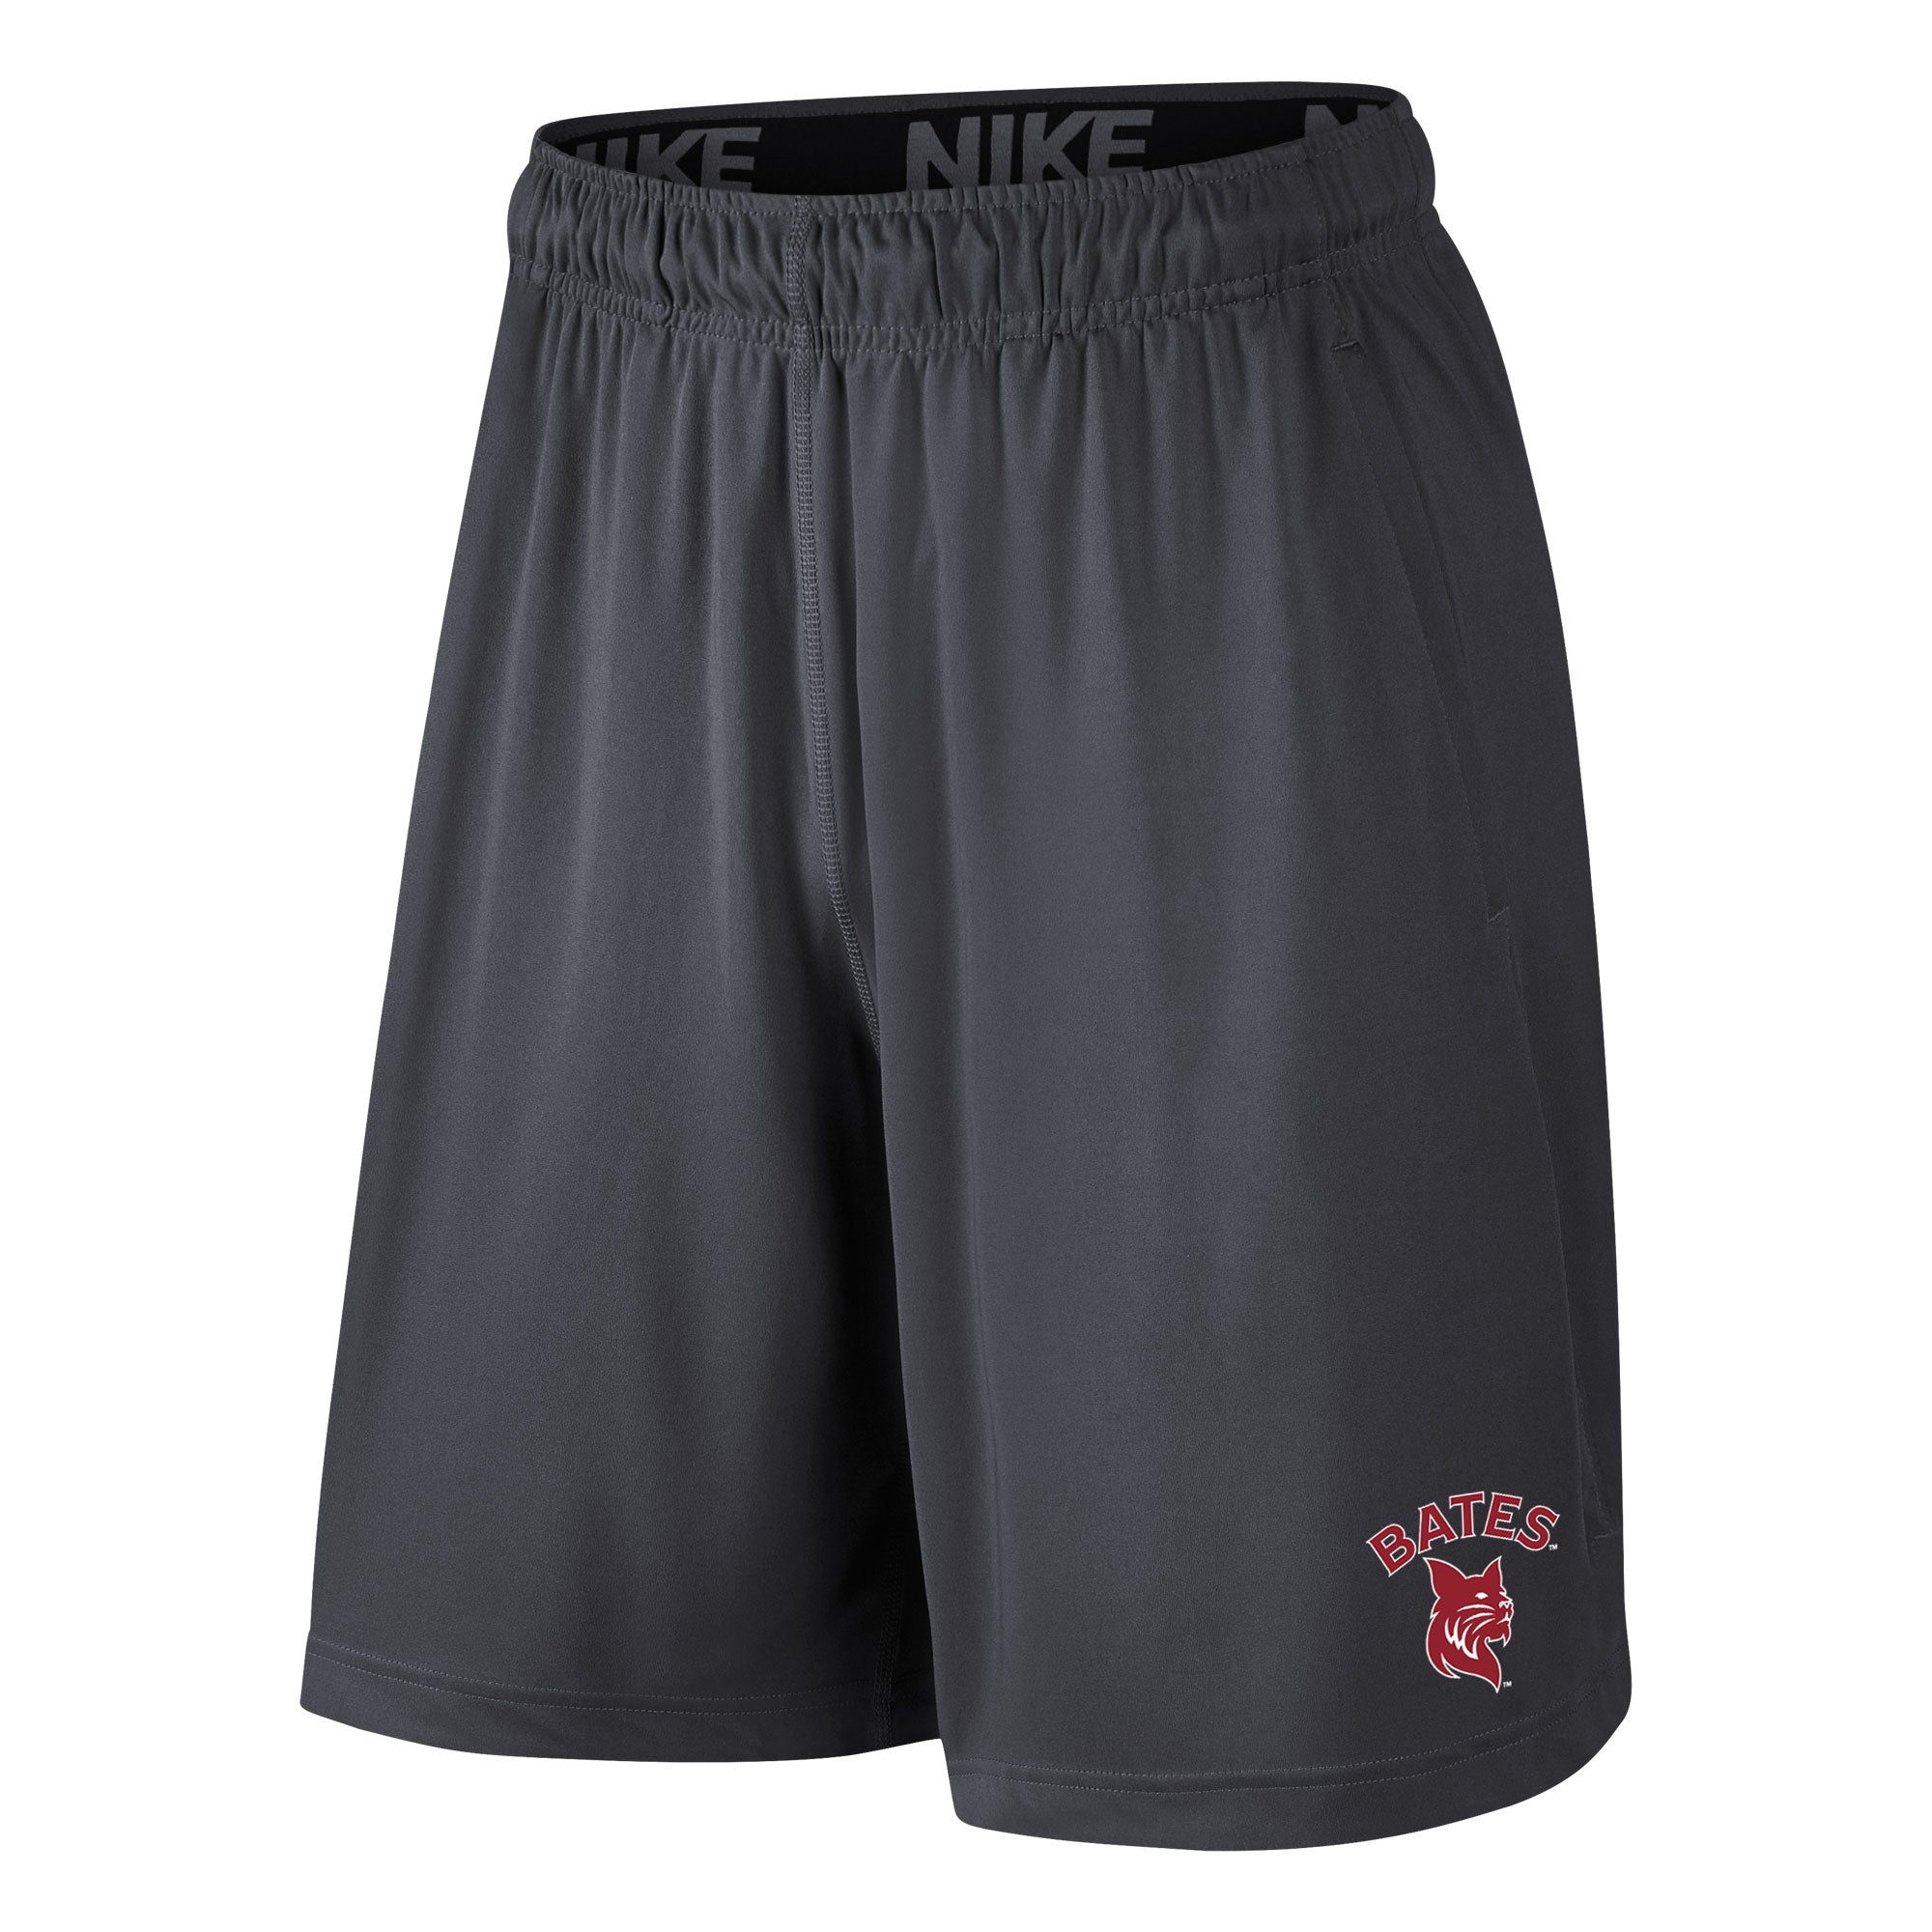 Nike Fly 2.0 Short | Bates College Store